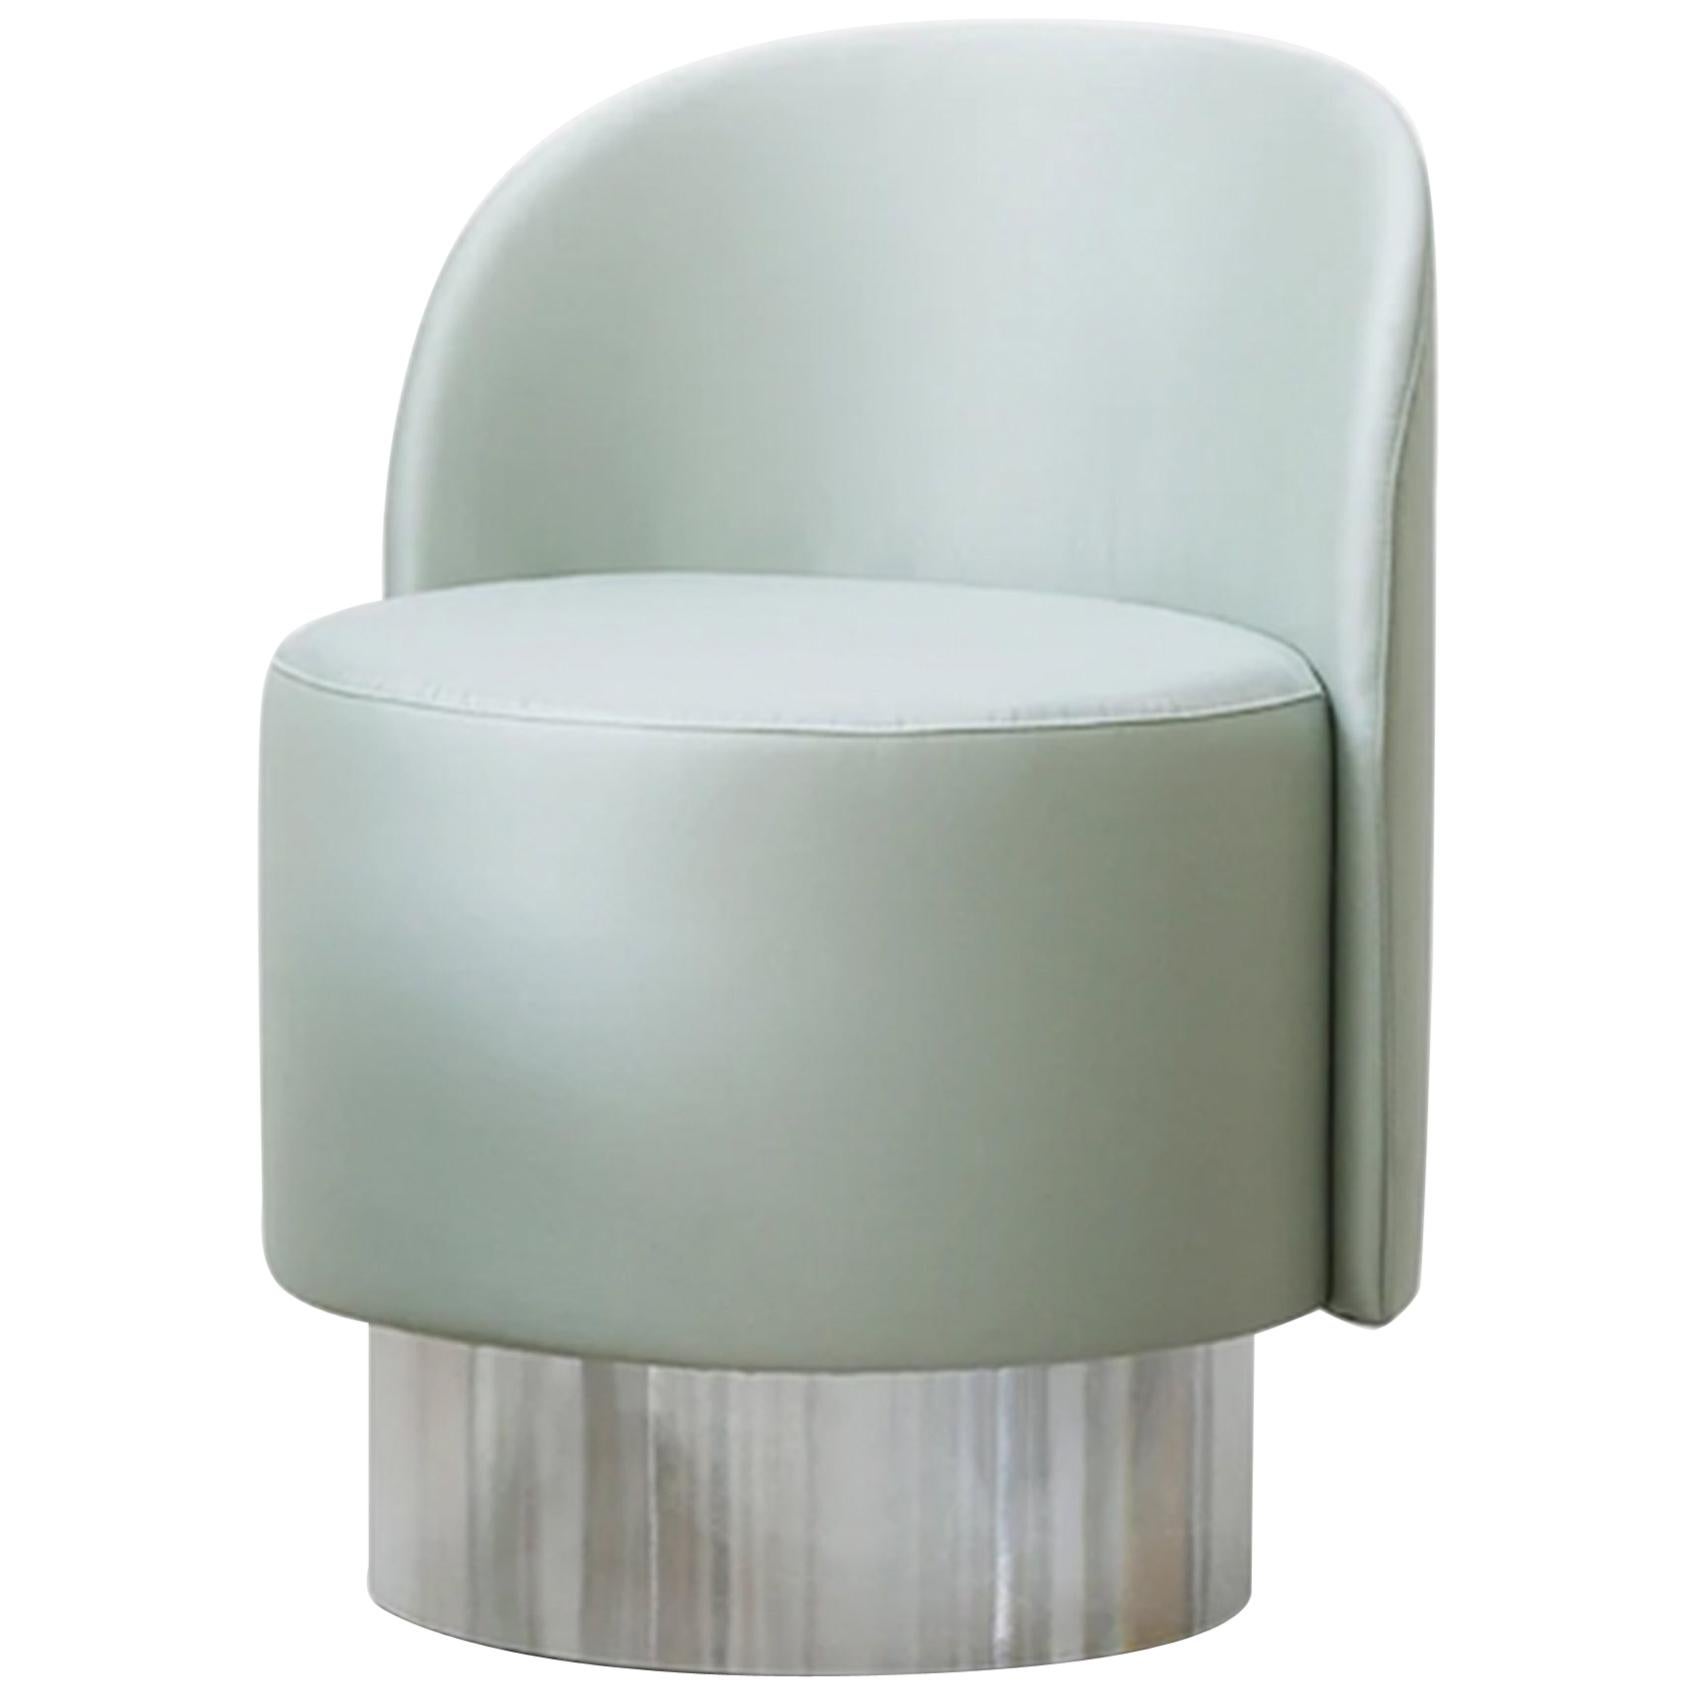 Customizable Tacchini Set of Two Pastille Chairs Designed by Studiopepe